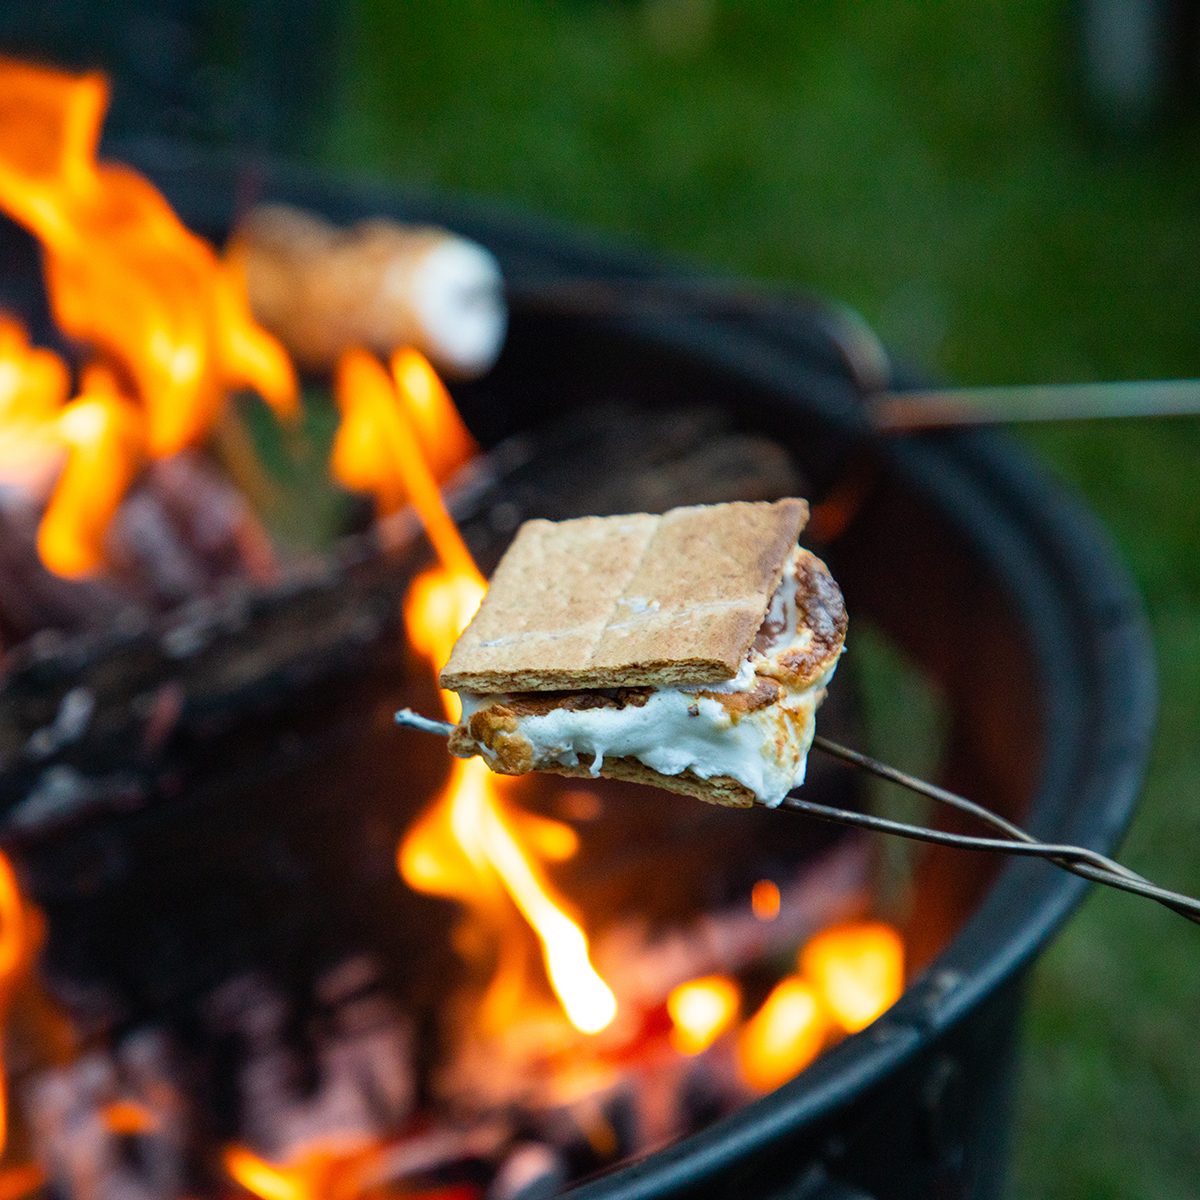 Cooking s’mores on a cool summer night in the mountains of northern Idaho